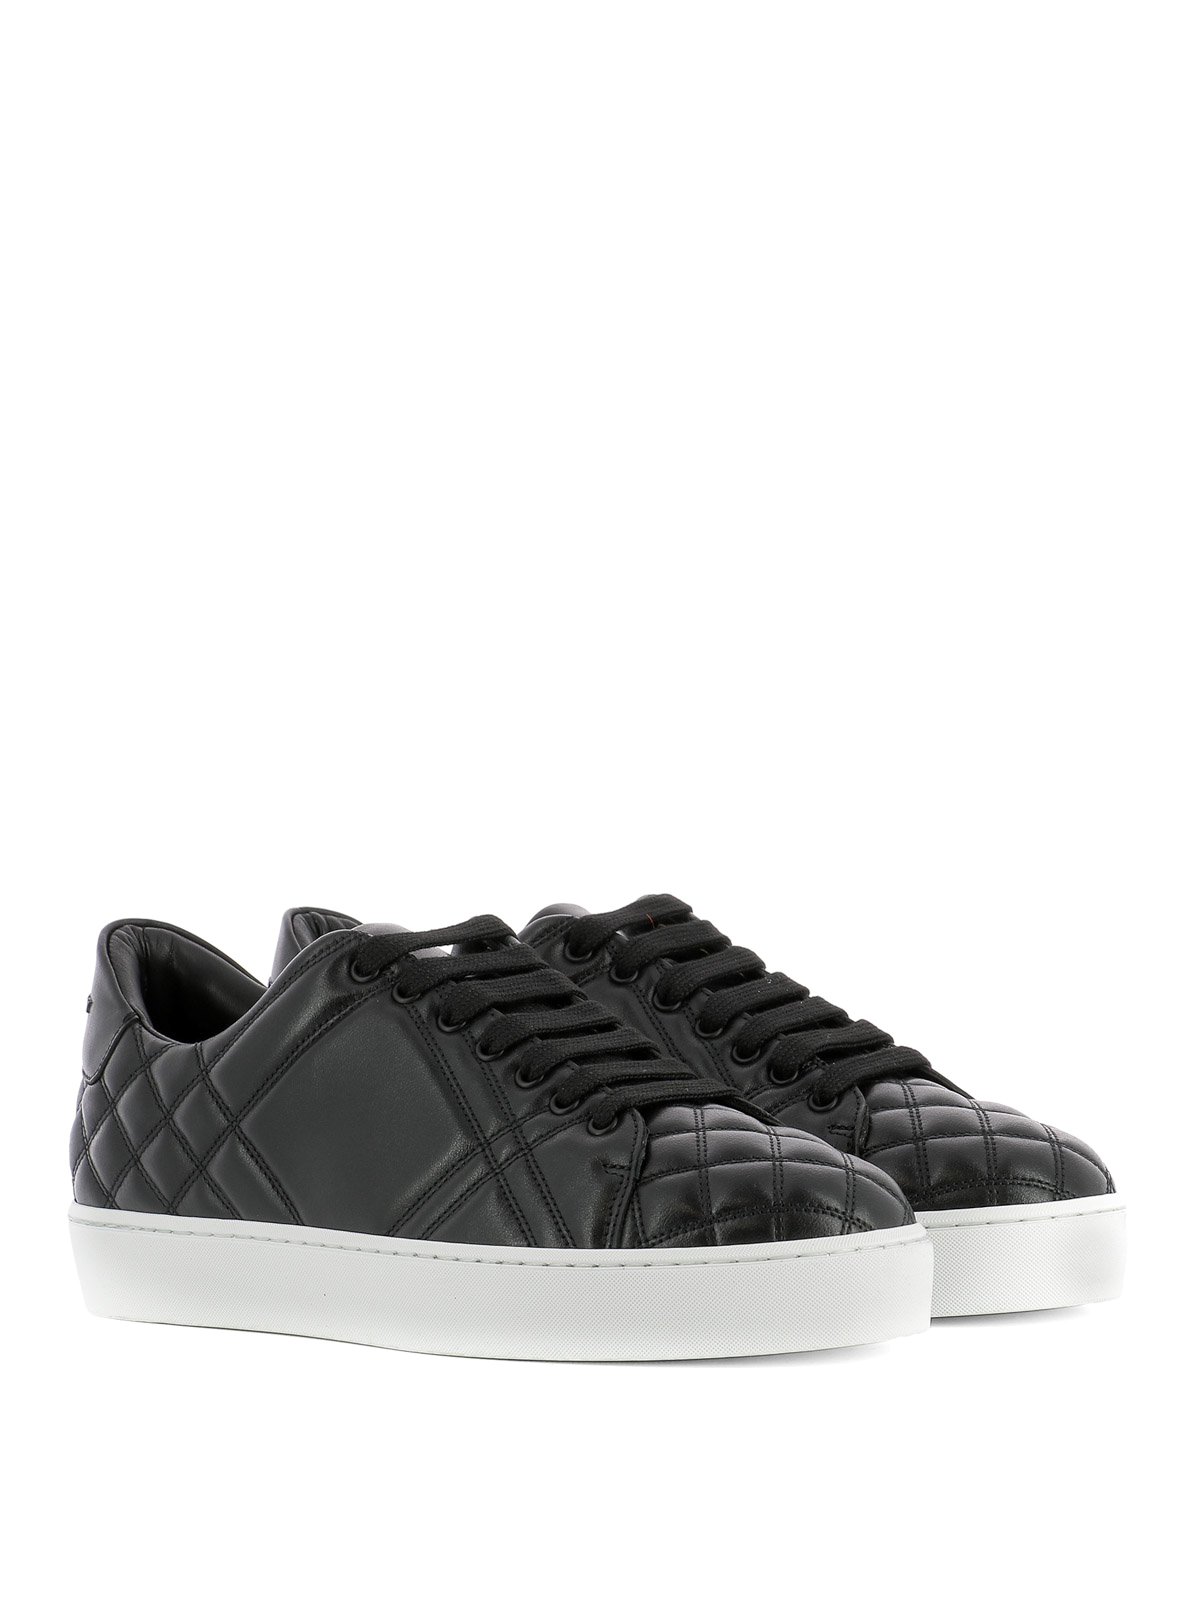 Trainers Burberry - Westford quilted leather sneakers - 4054106